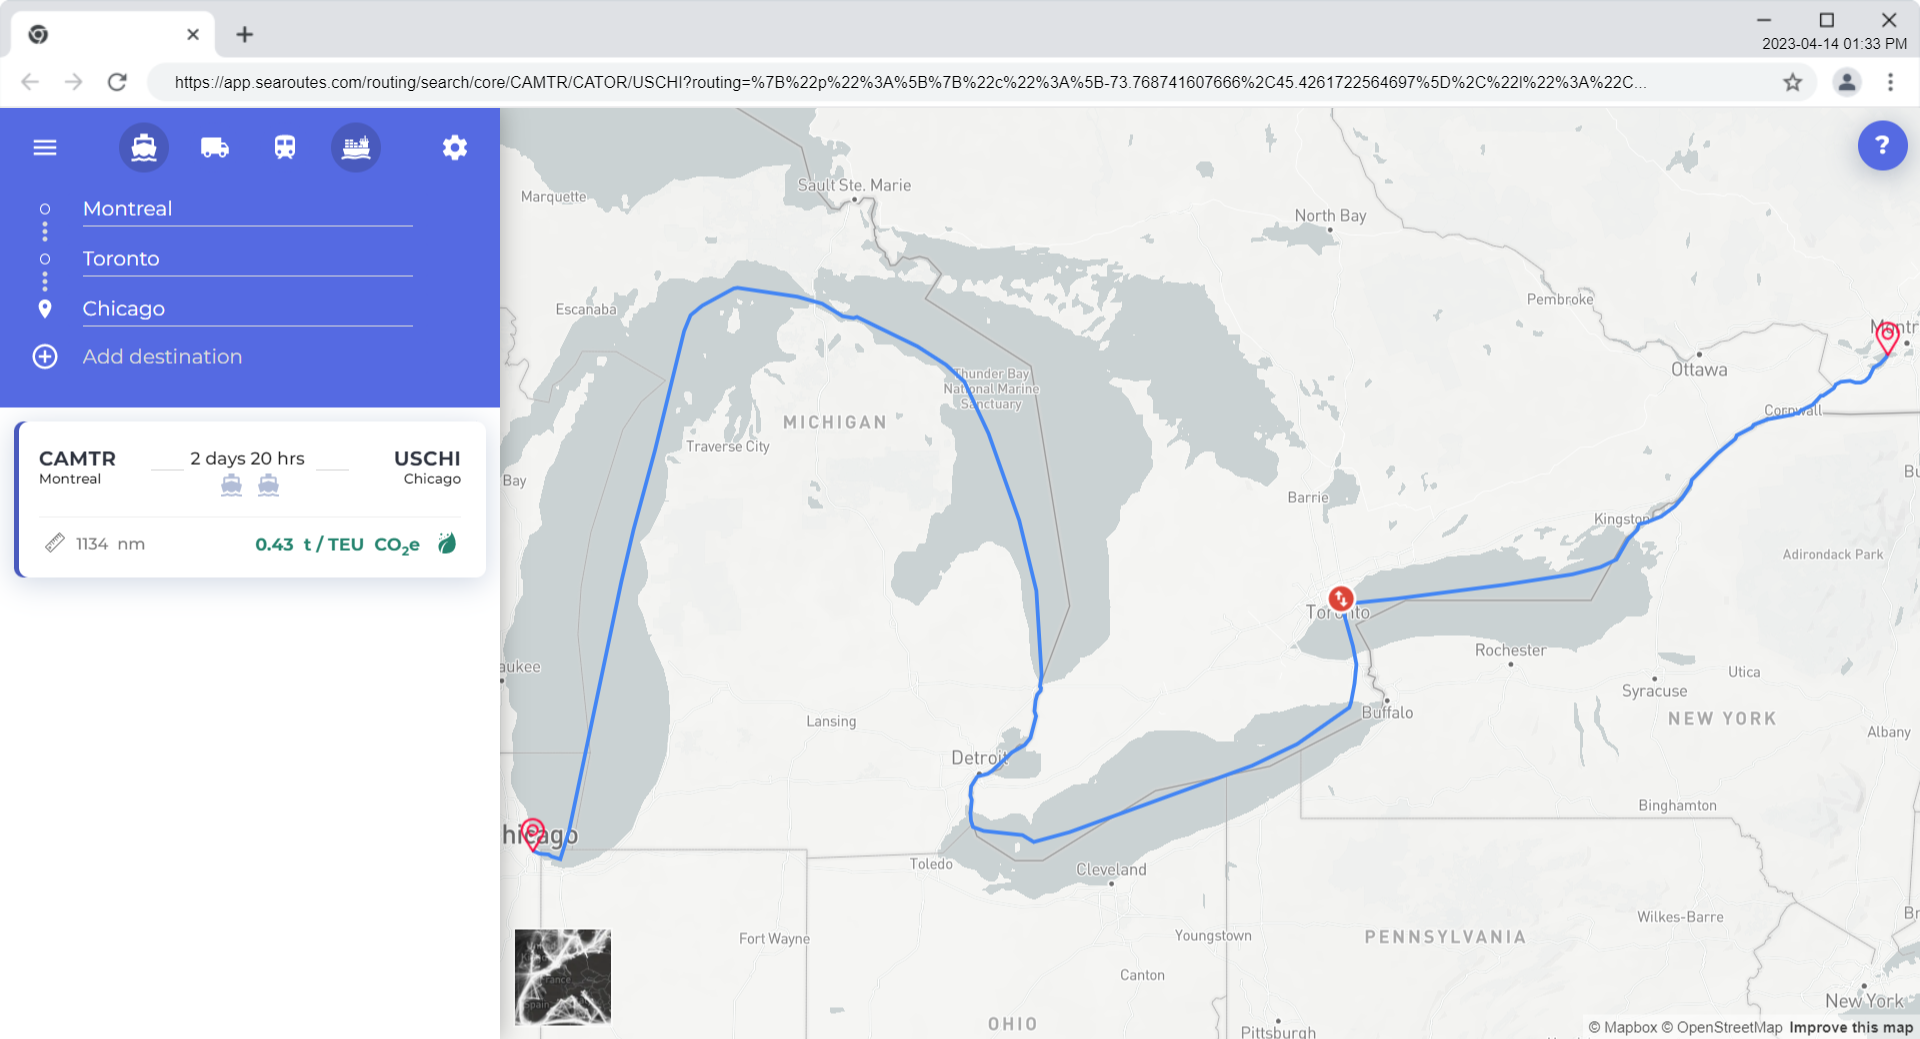 Itinerary distance and CO2 from Montreal to Chicago